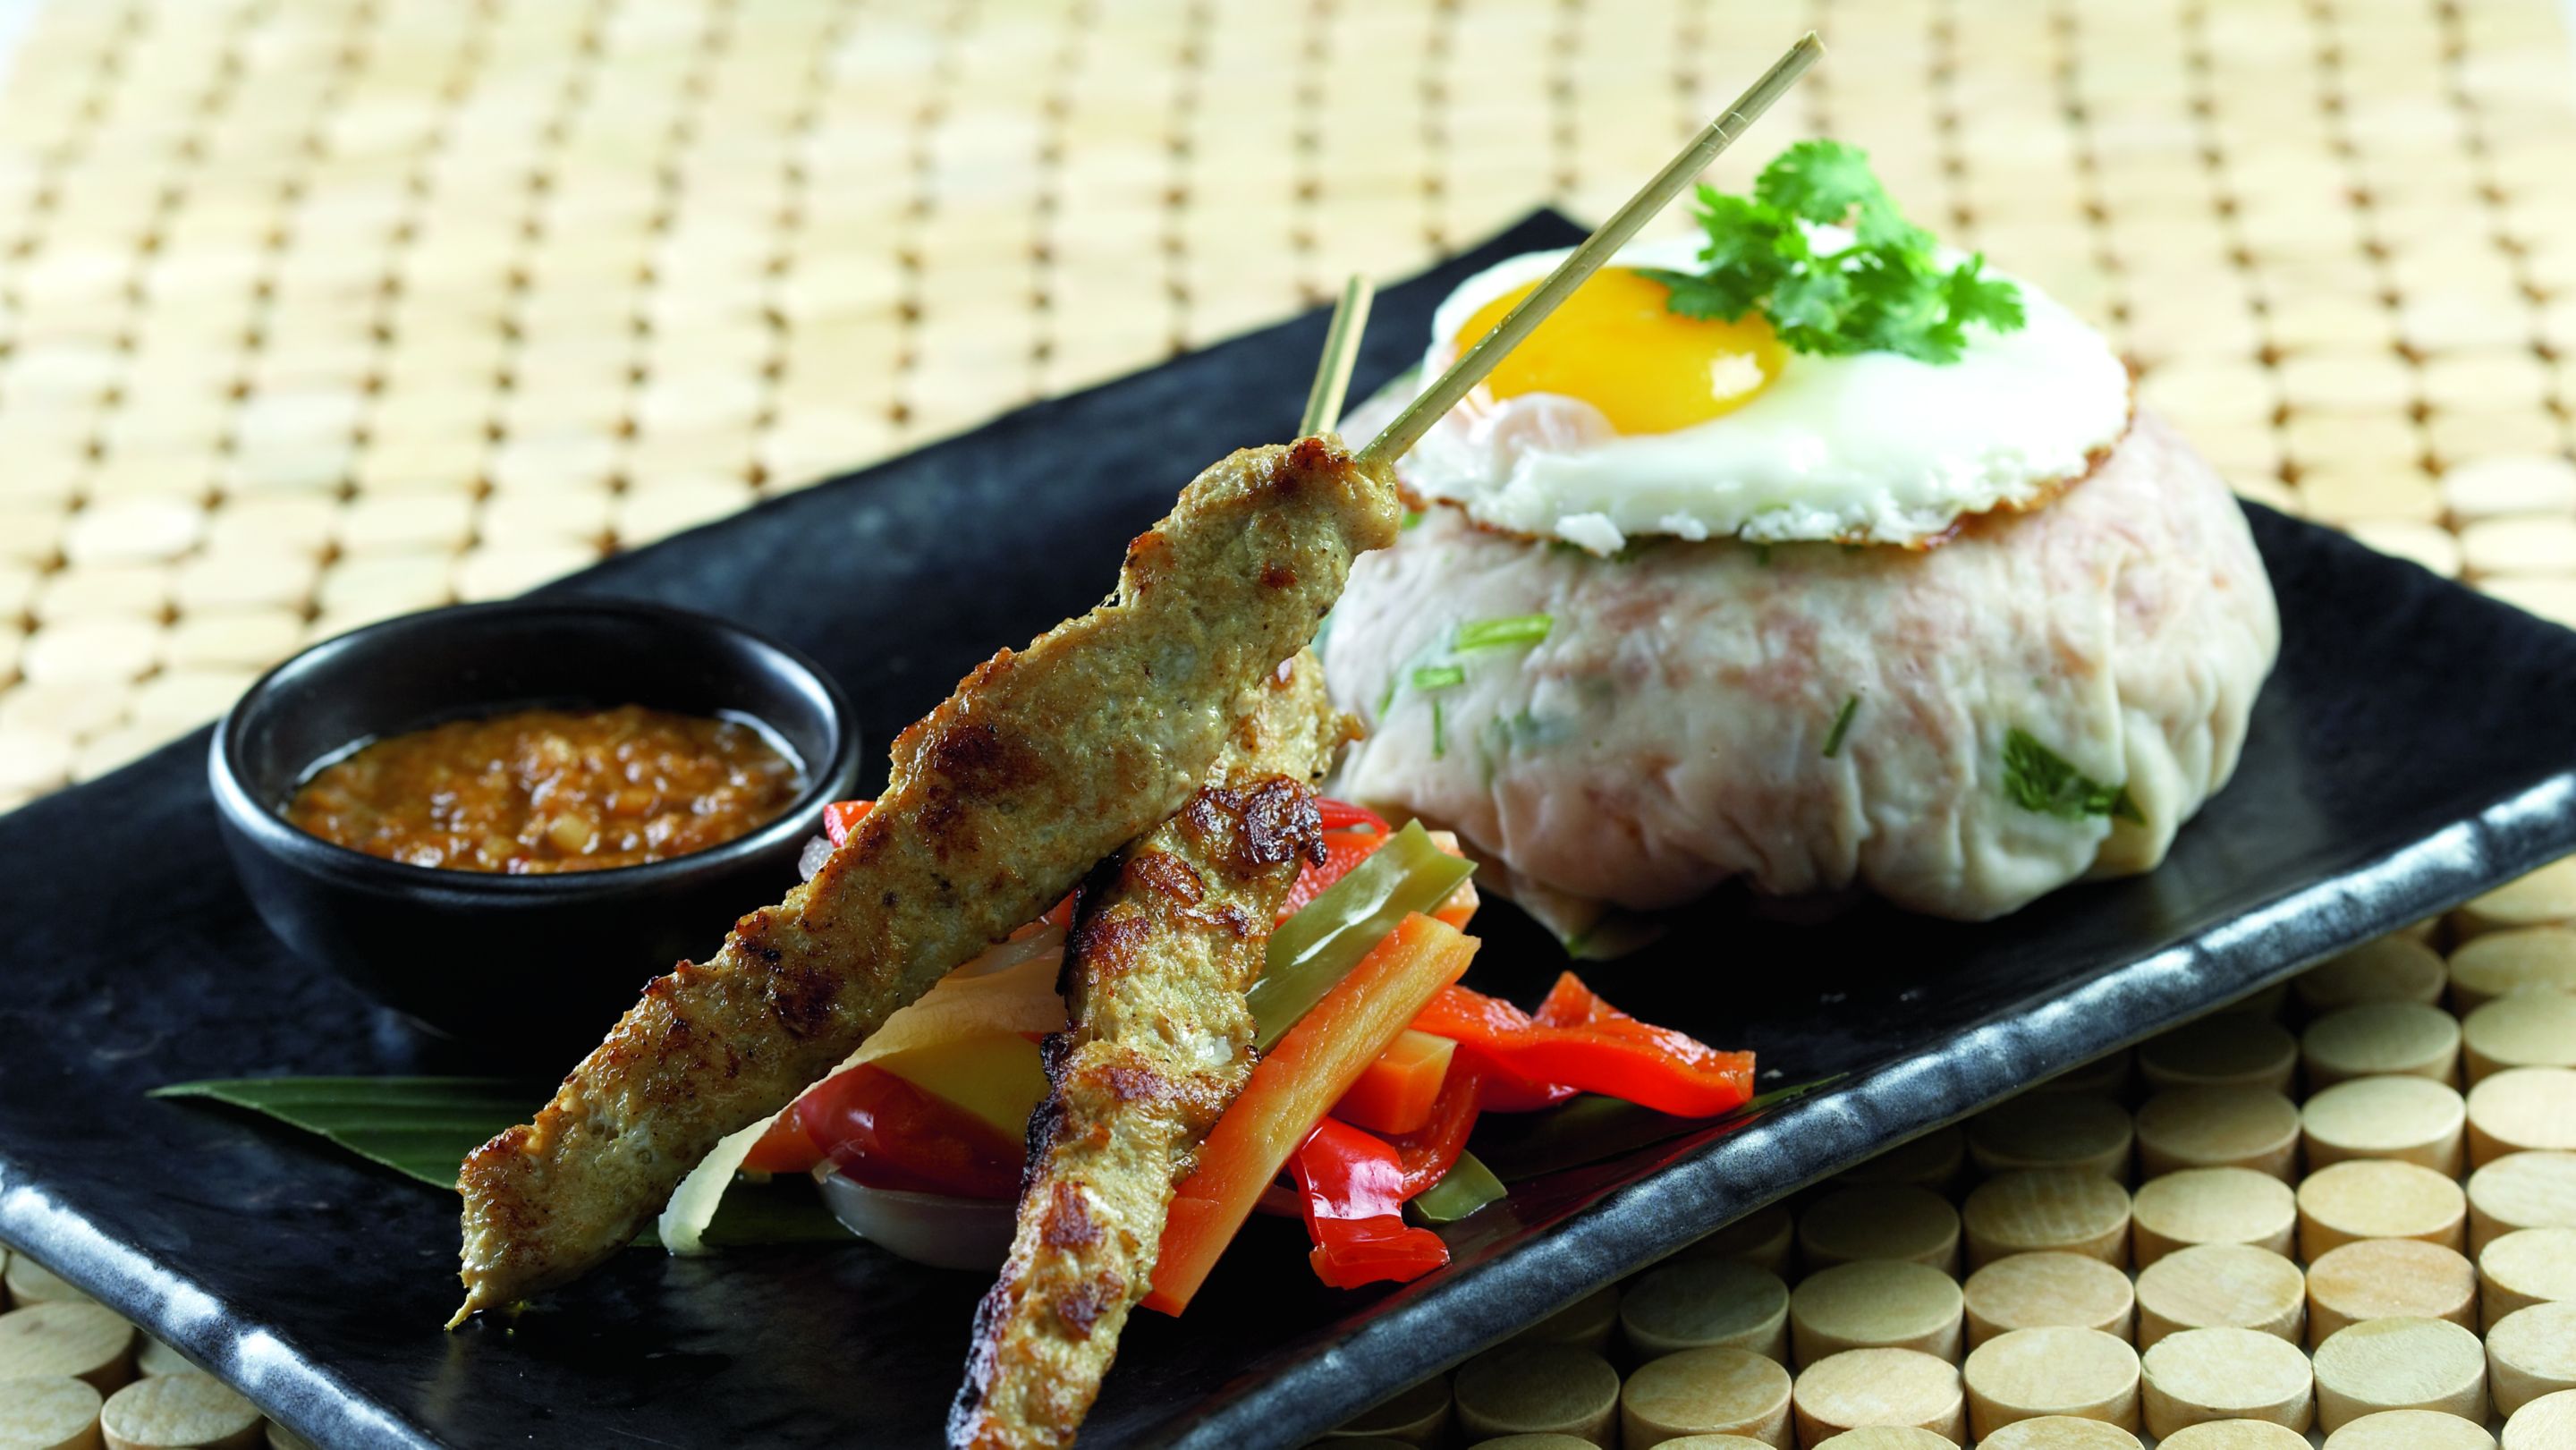 Tray with chicken satay, peppers and a fried egg